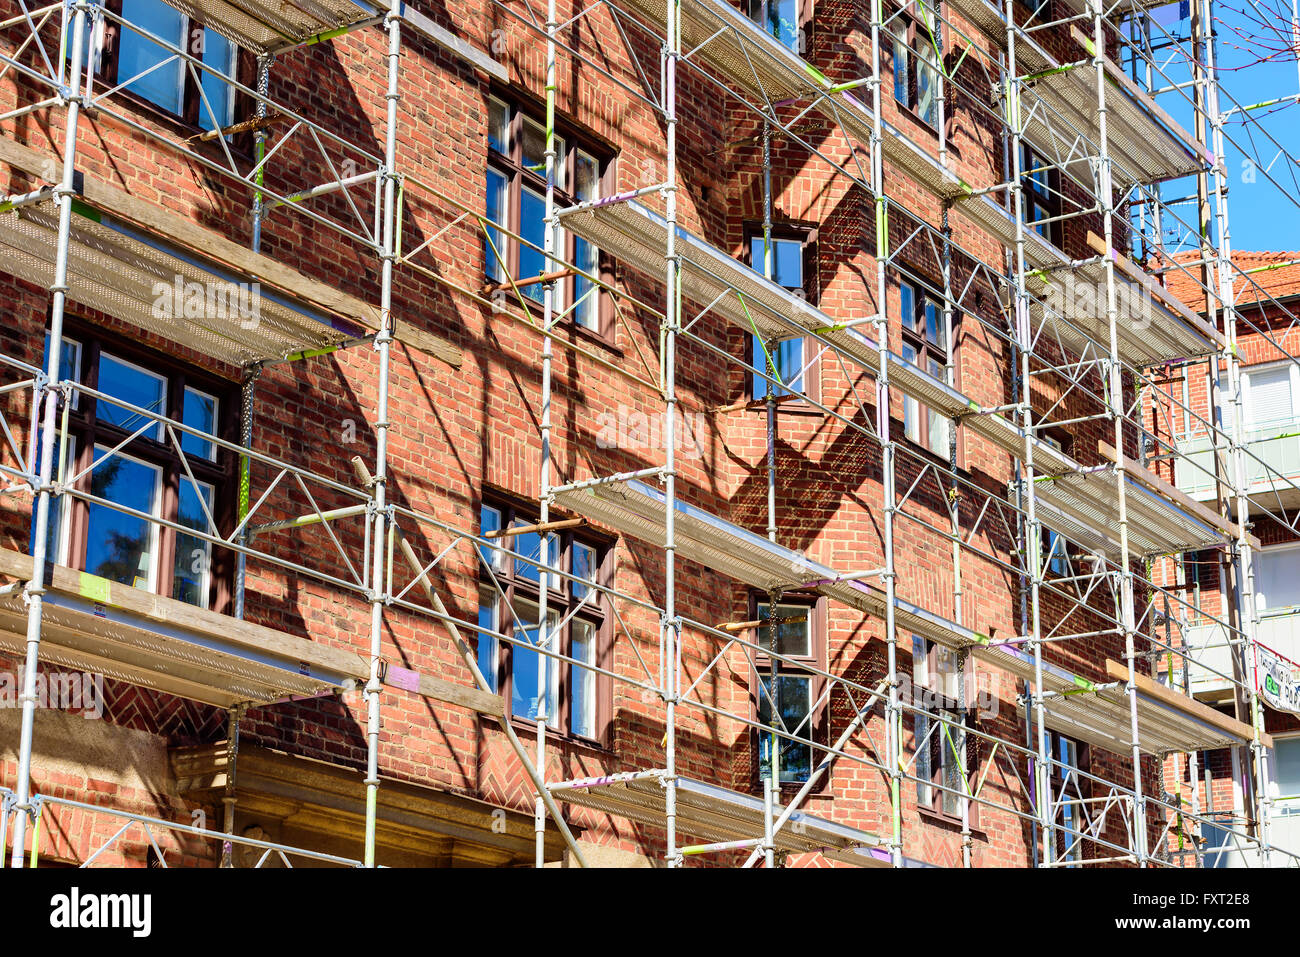 Lund, Sweden - April 11, 2016: Scaffoldings against a red brick apartment building being renovated. Stock Photo